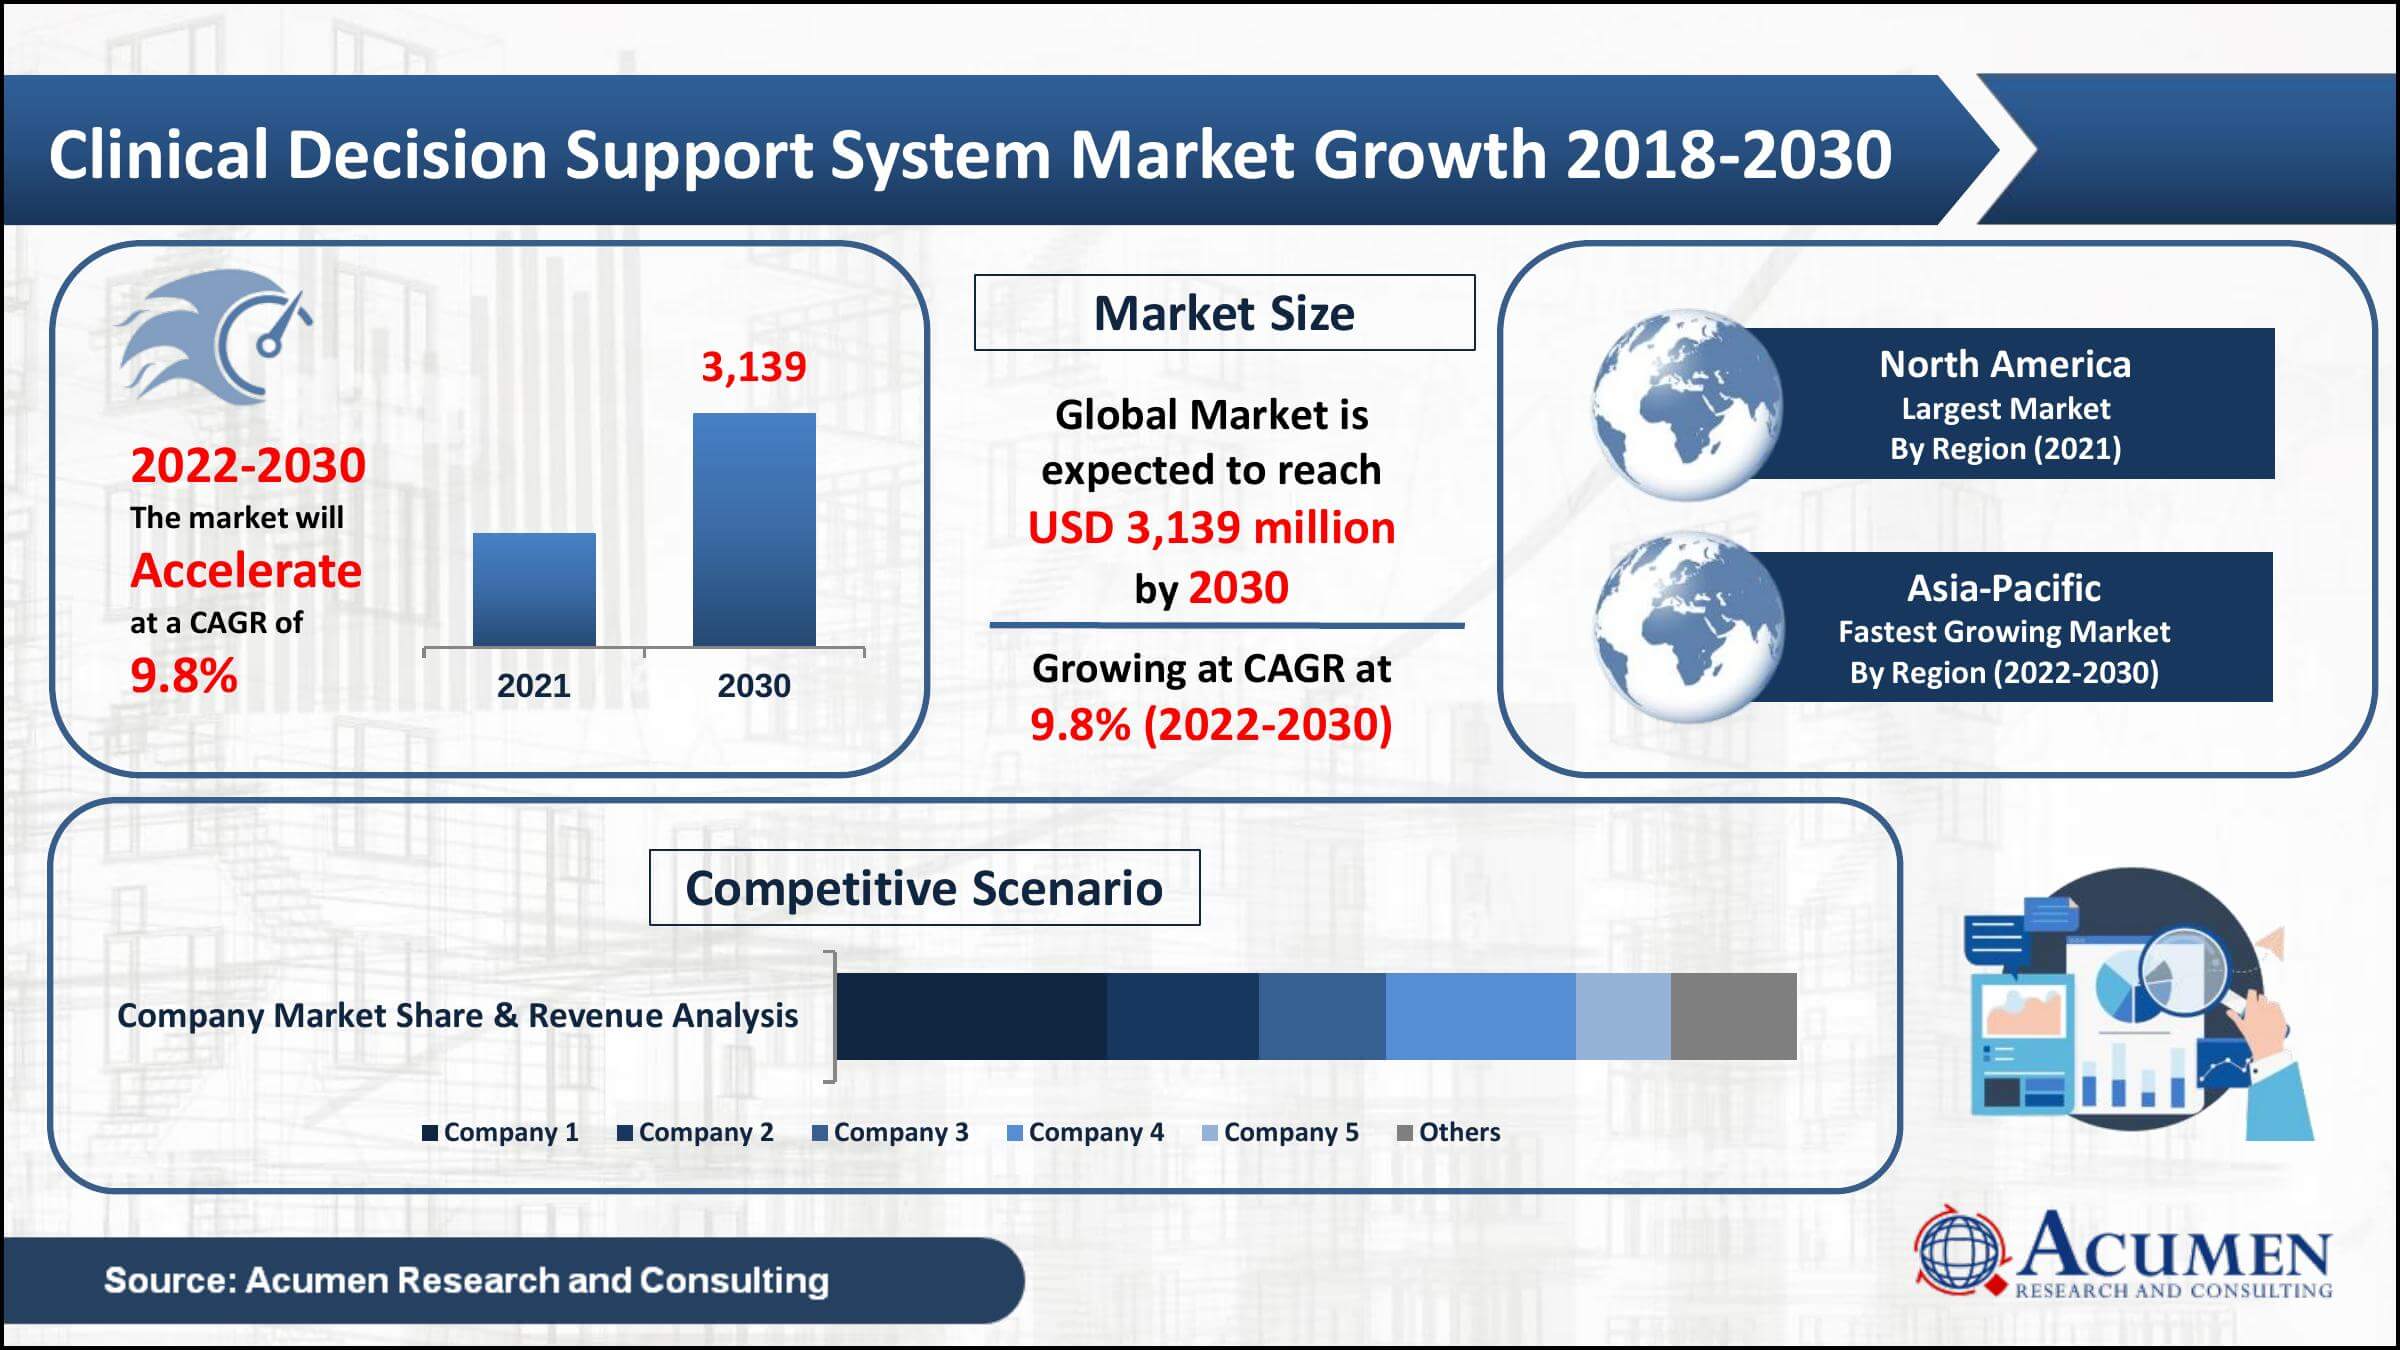 Global clinical decision support system market value was worth USD 1,368 Million in 2021, with a 9.8% CAGR from 2022 to 2030